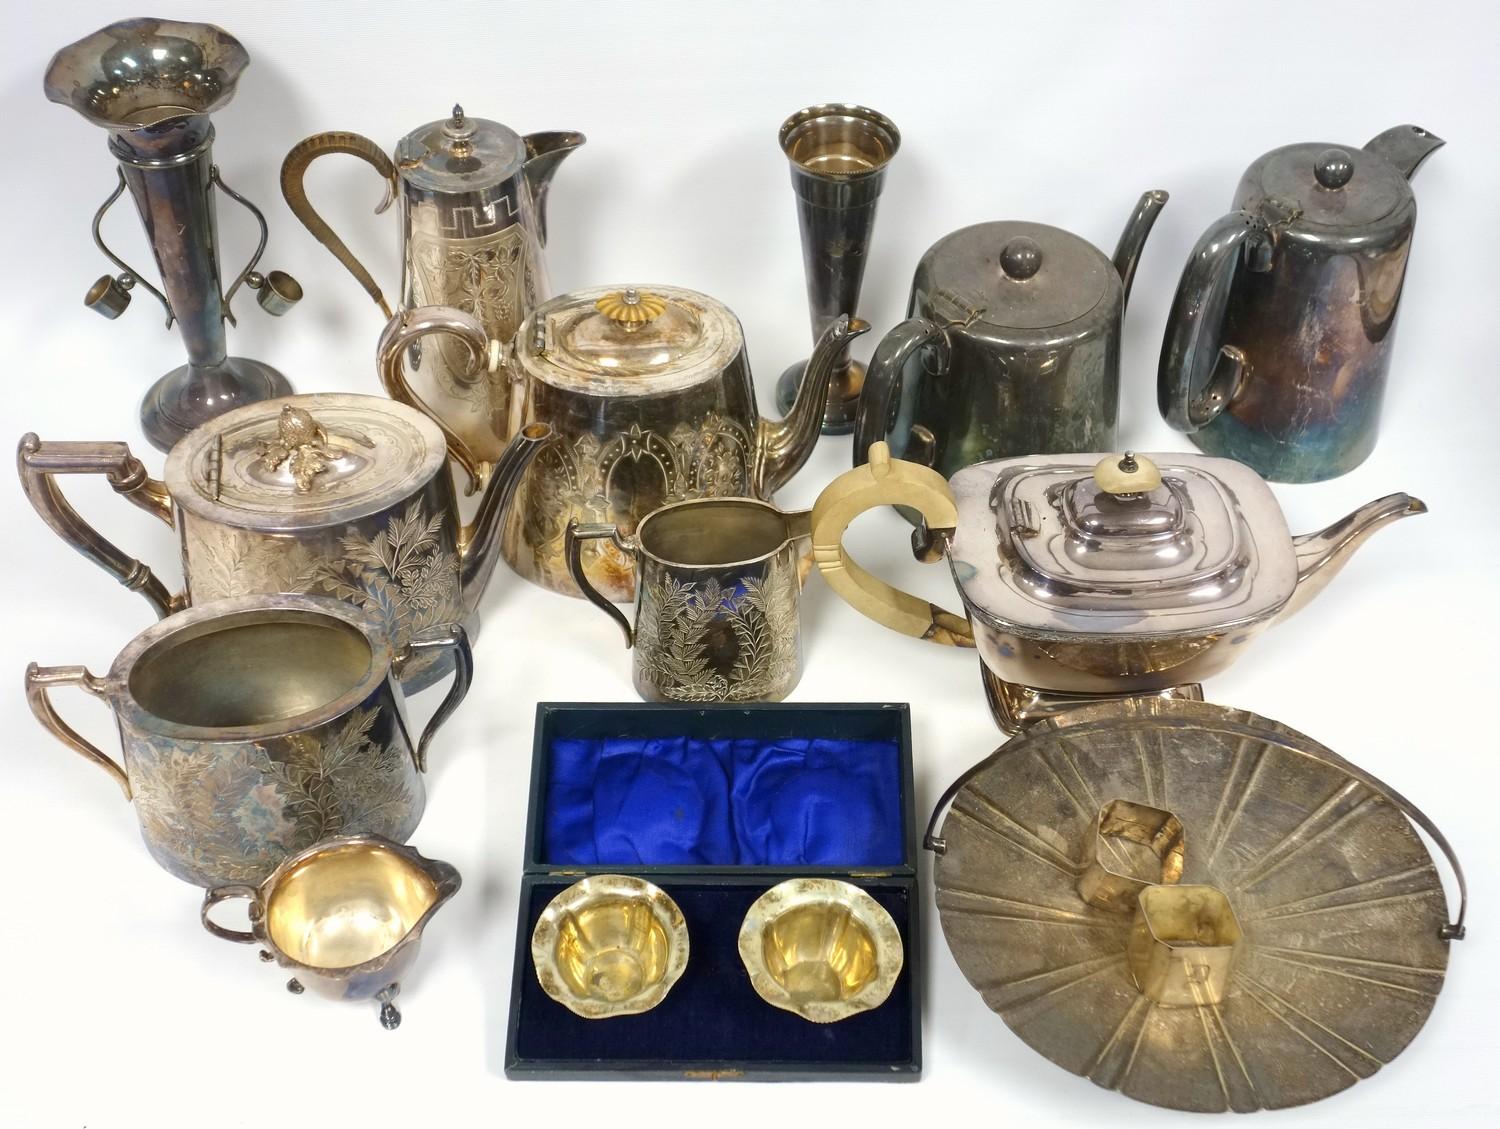 Quantity of silver plate including a tea pot with engraved decoration of ferns